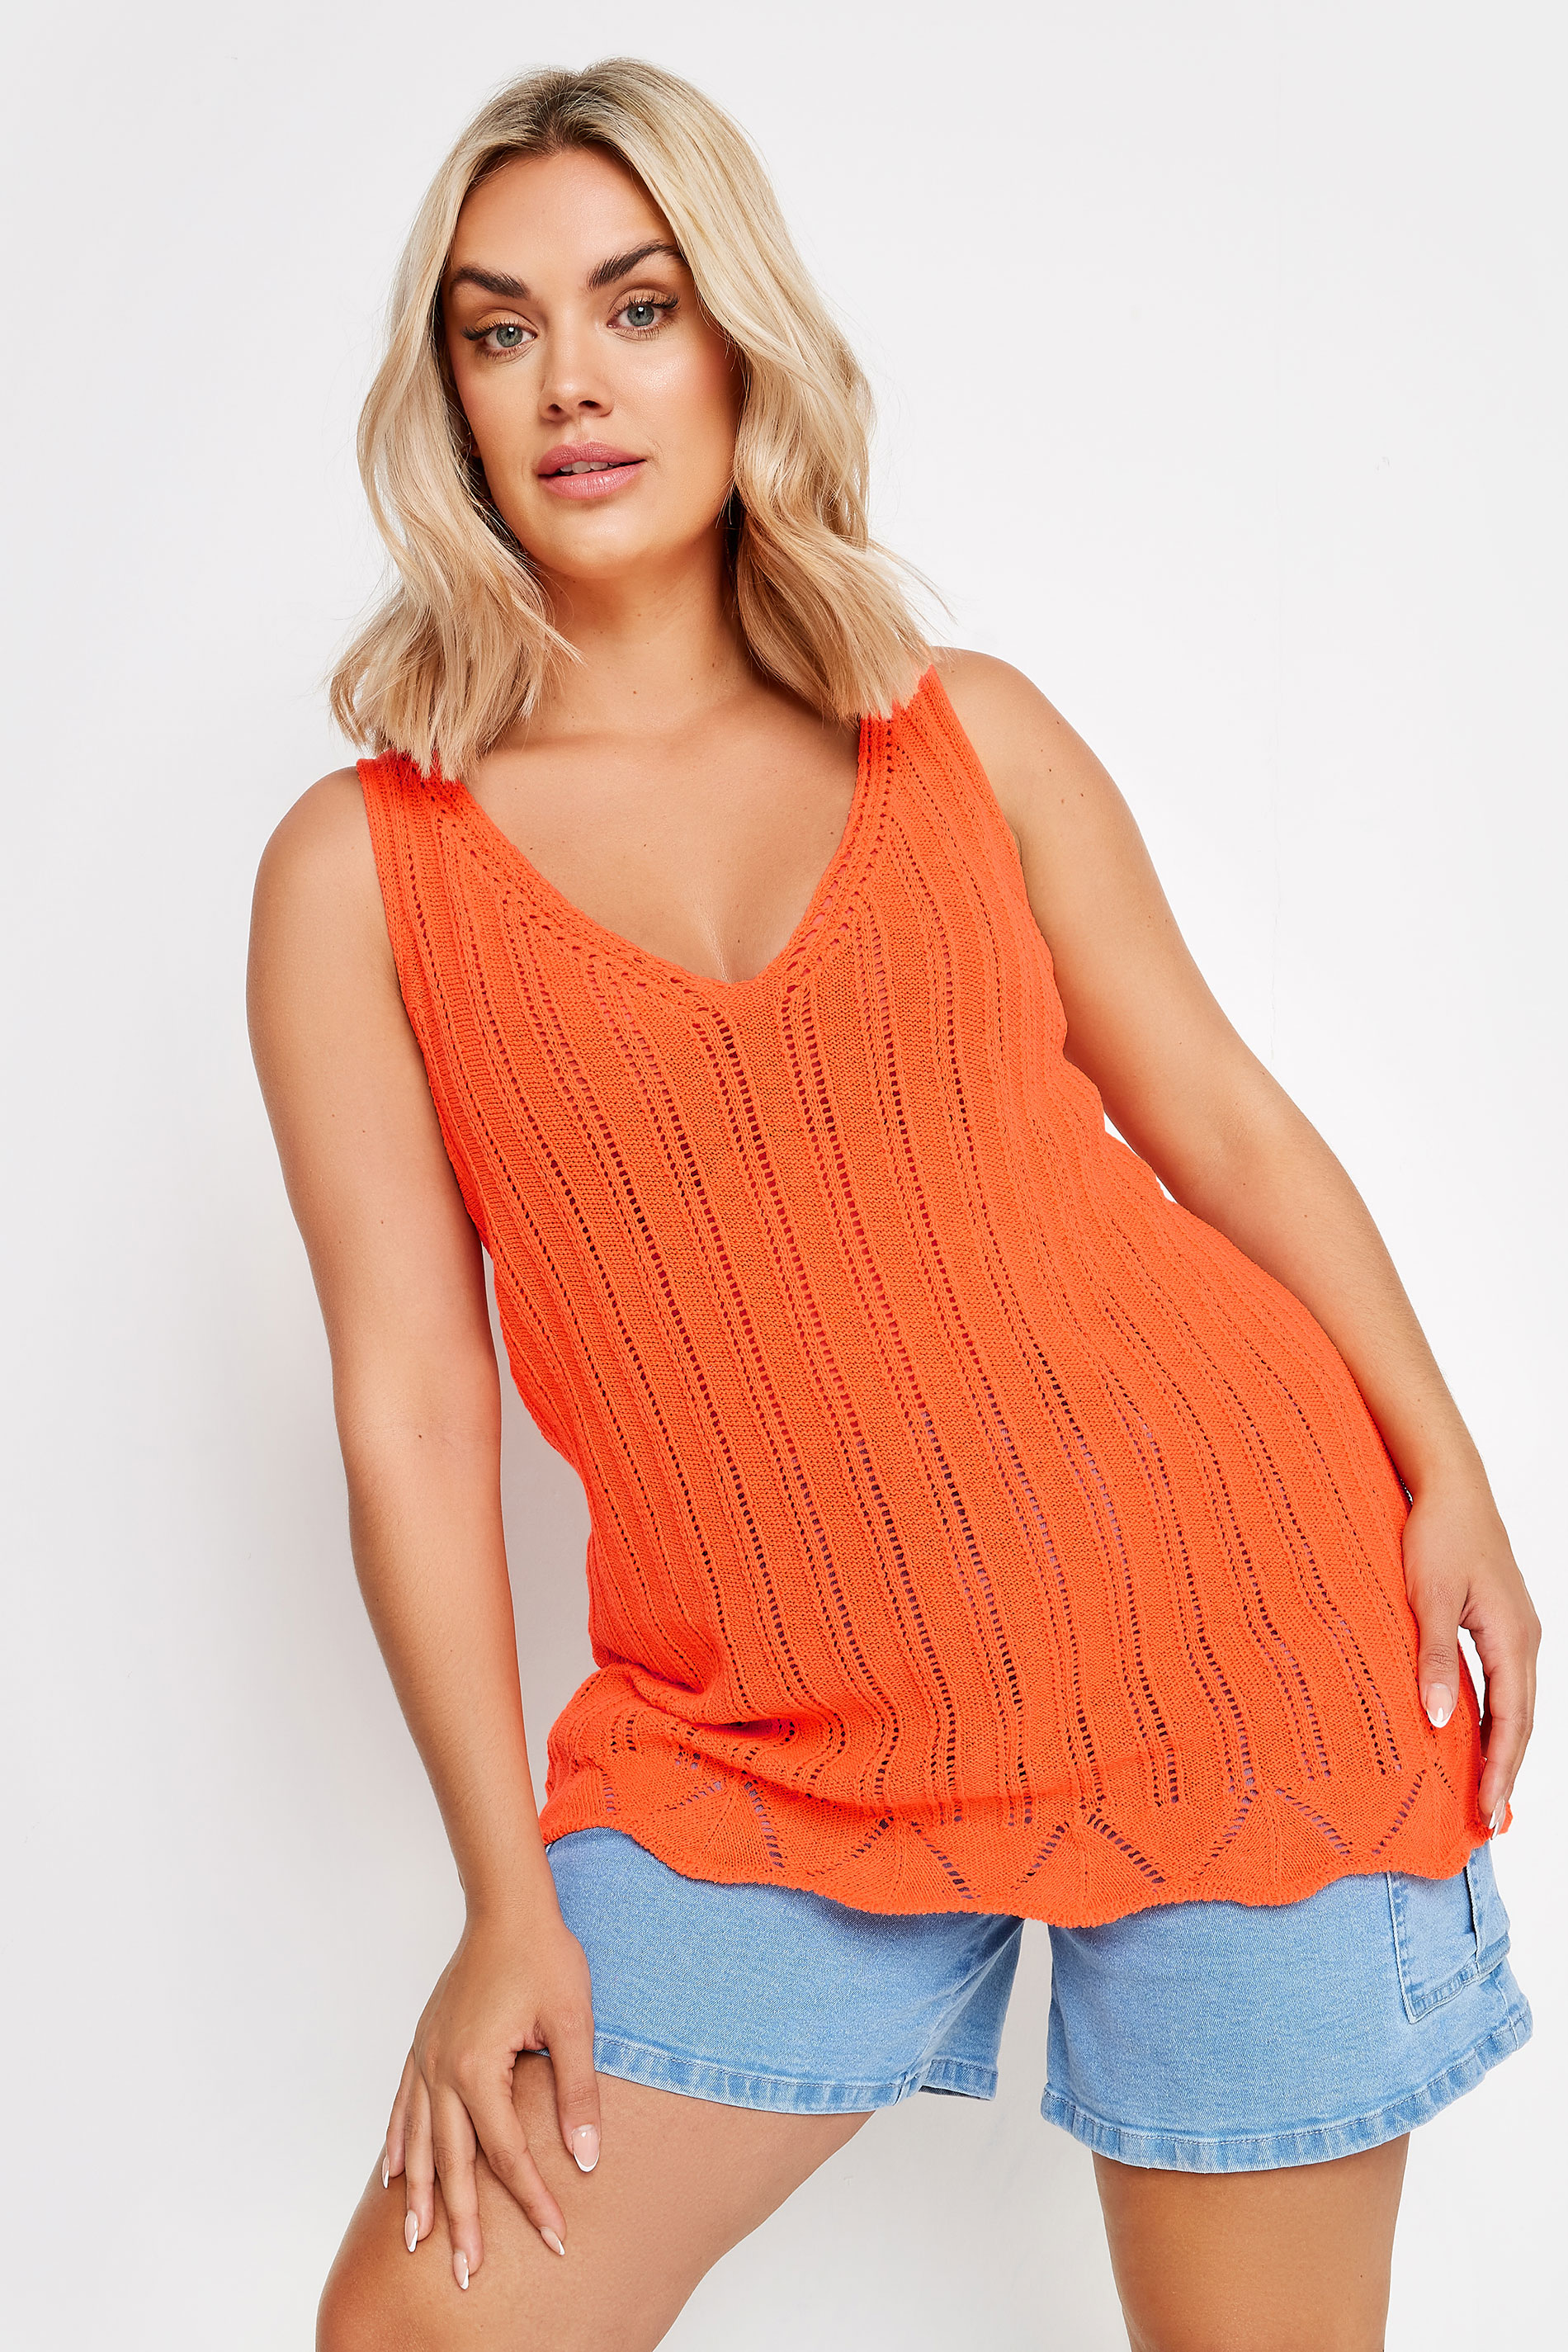 YOURS Plus Size Orange Crochet Knitted Vest Top | Yours Clothing 2